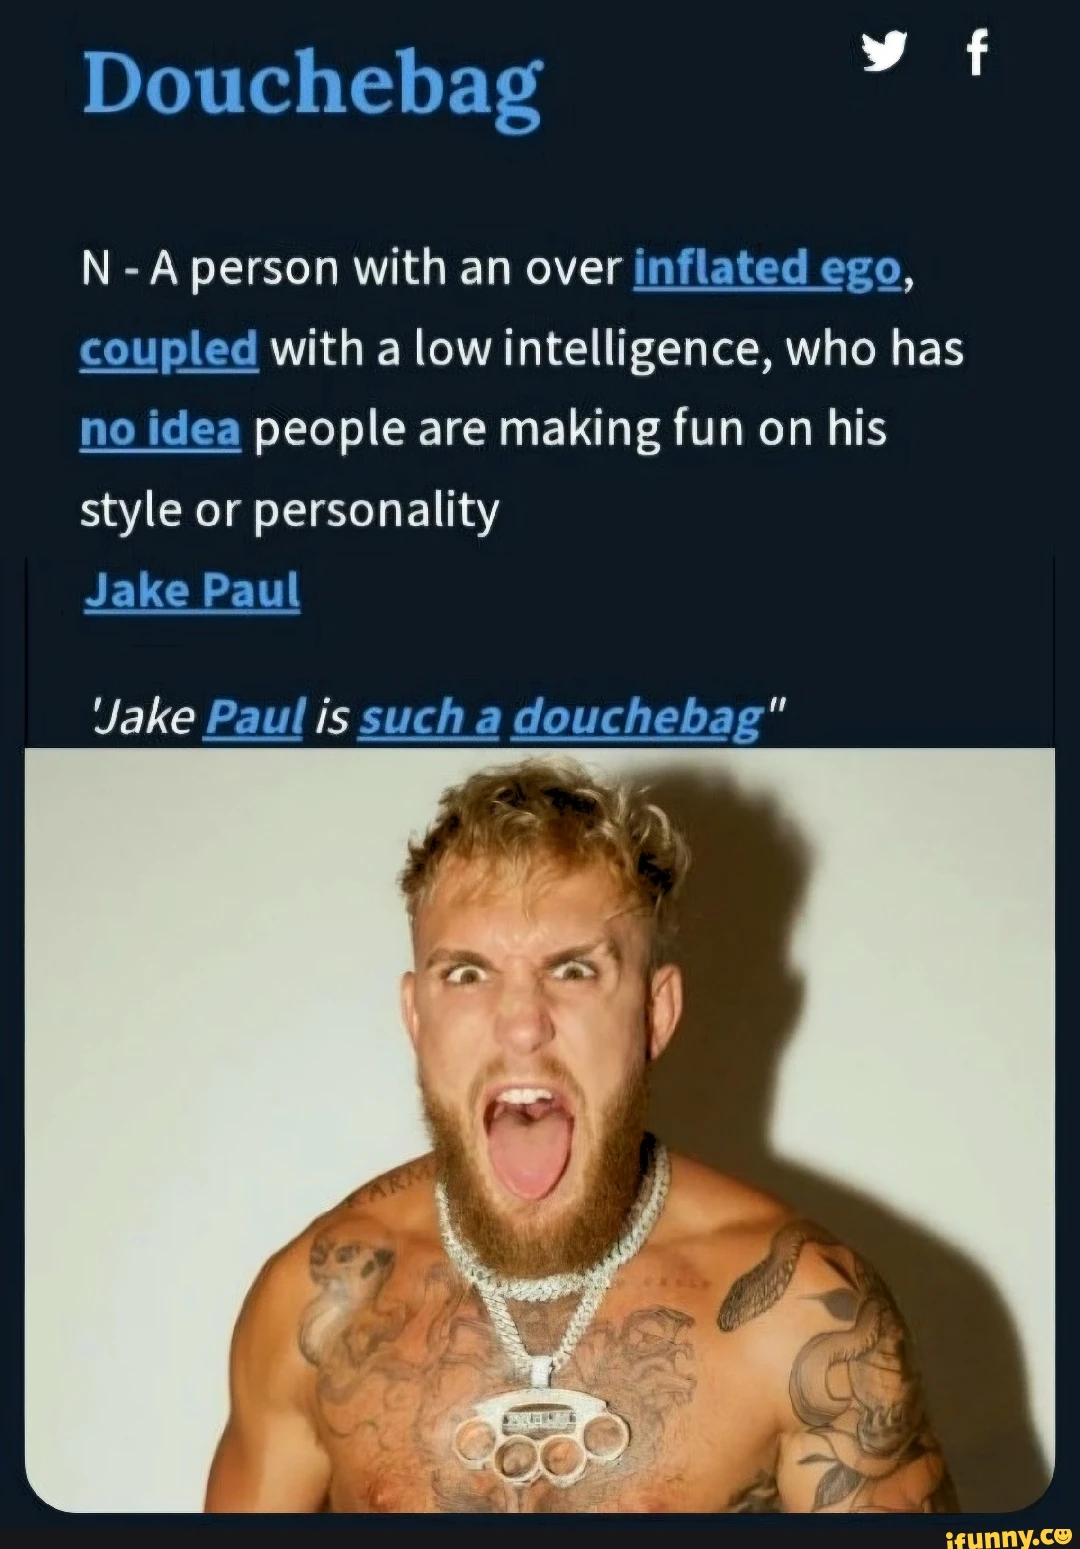 Douchebag N -A person with an over inflated ego, coupled with a low intelligence, who has no idea people are making fun on his style or personality Jake Paul Jake Paul is such a douchebag"